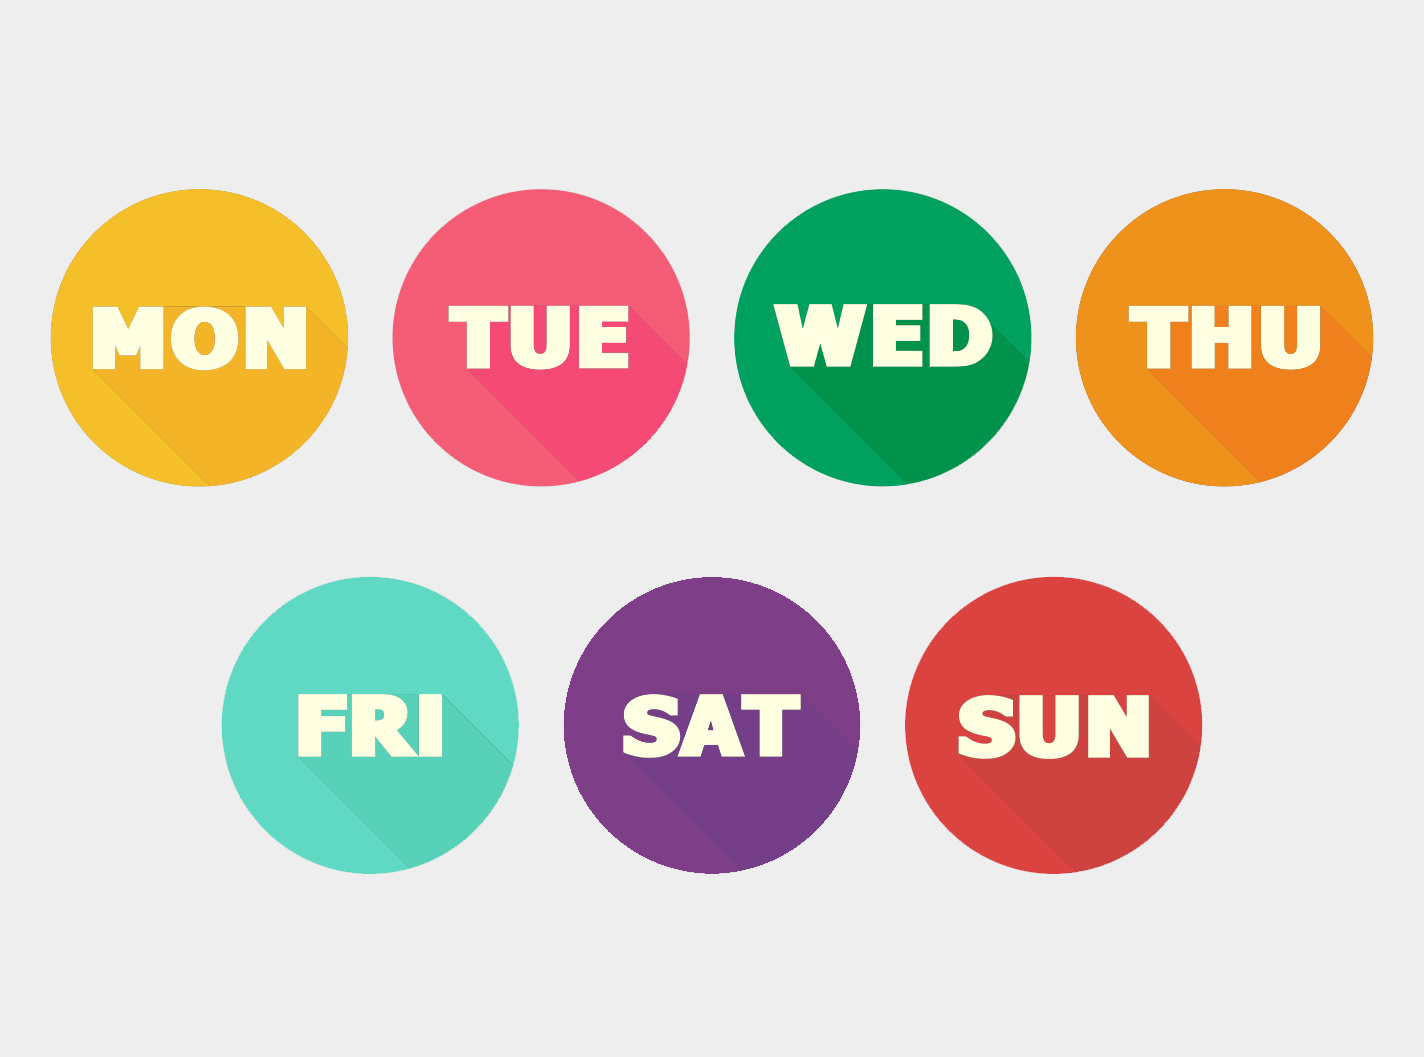 Days of the Week in Swahili